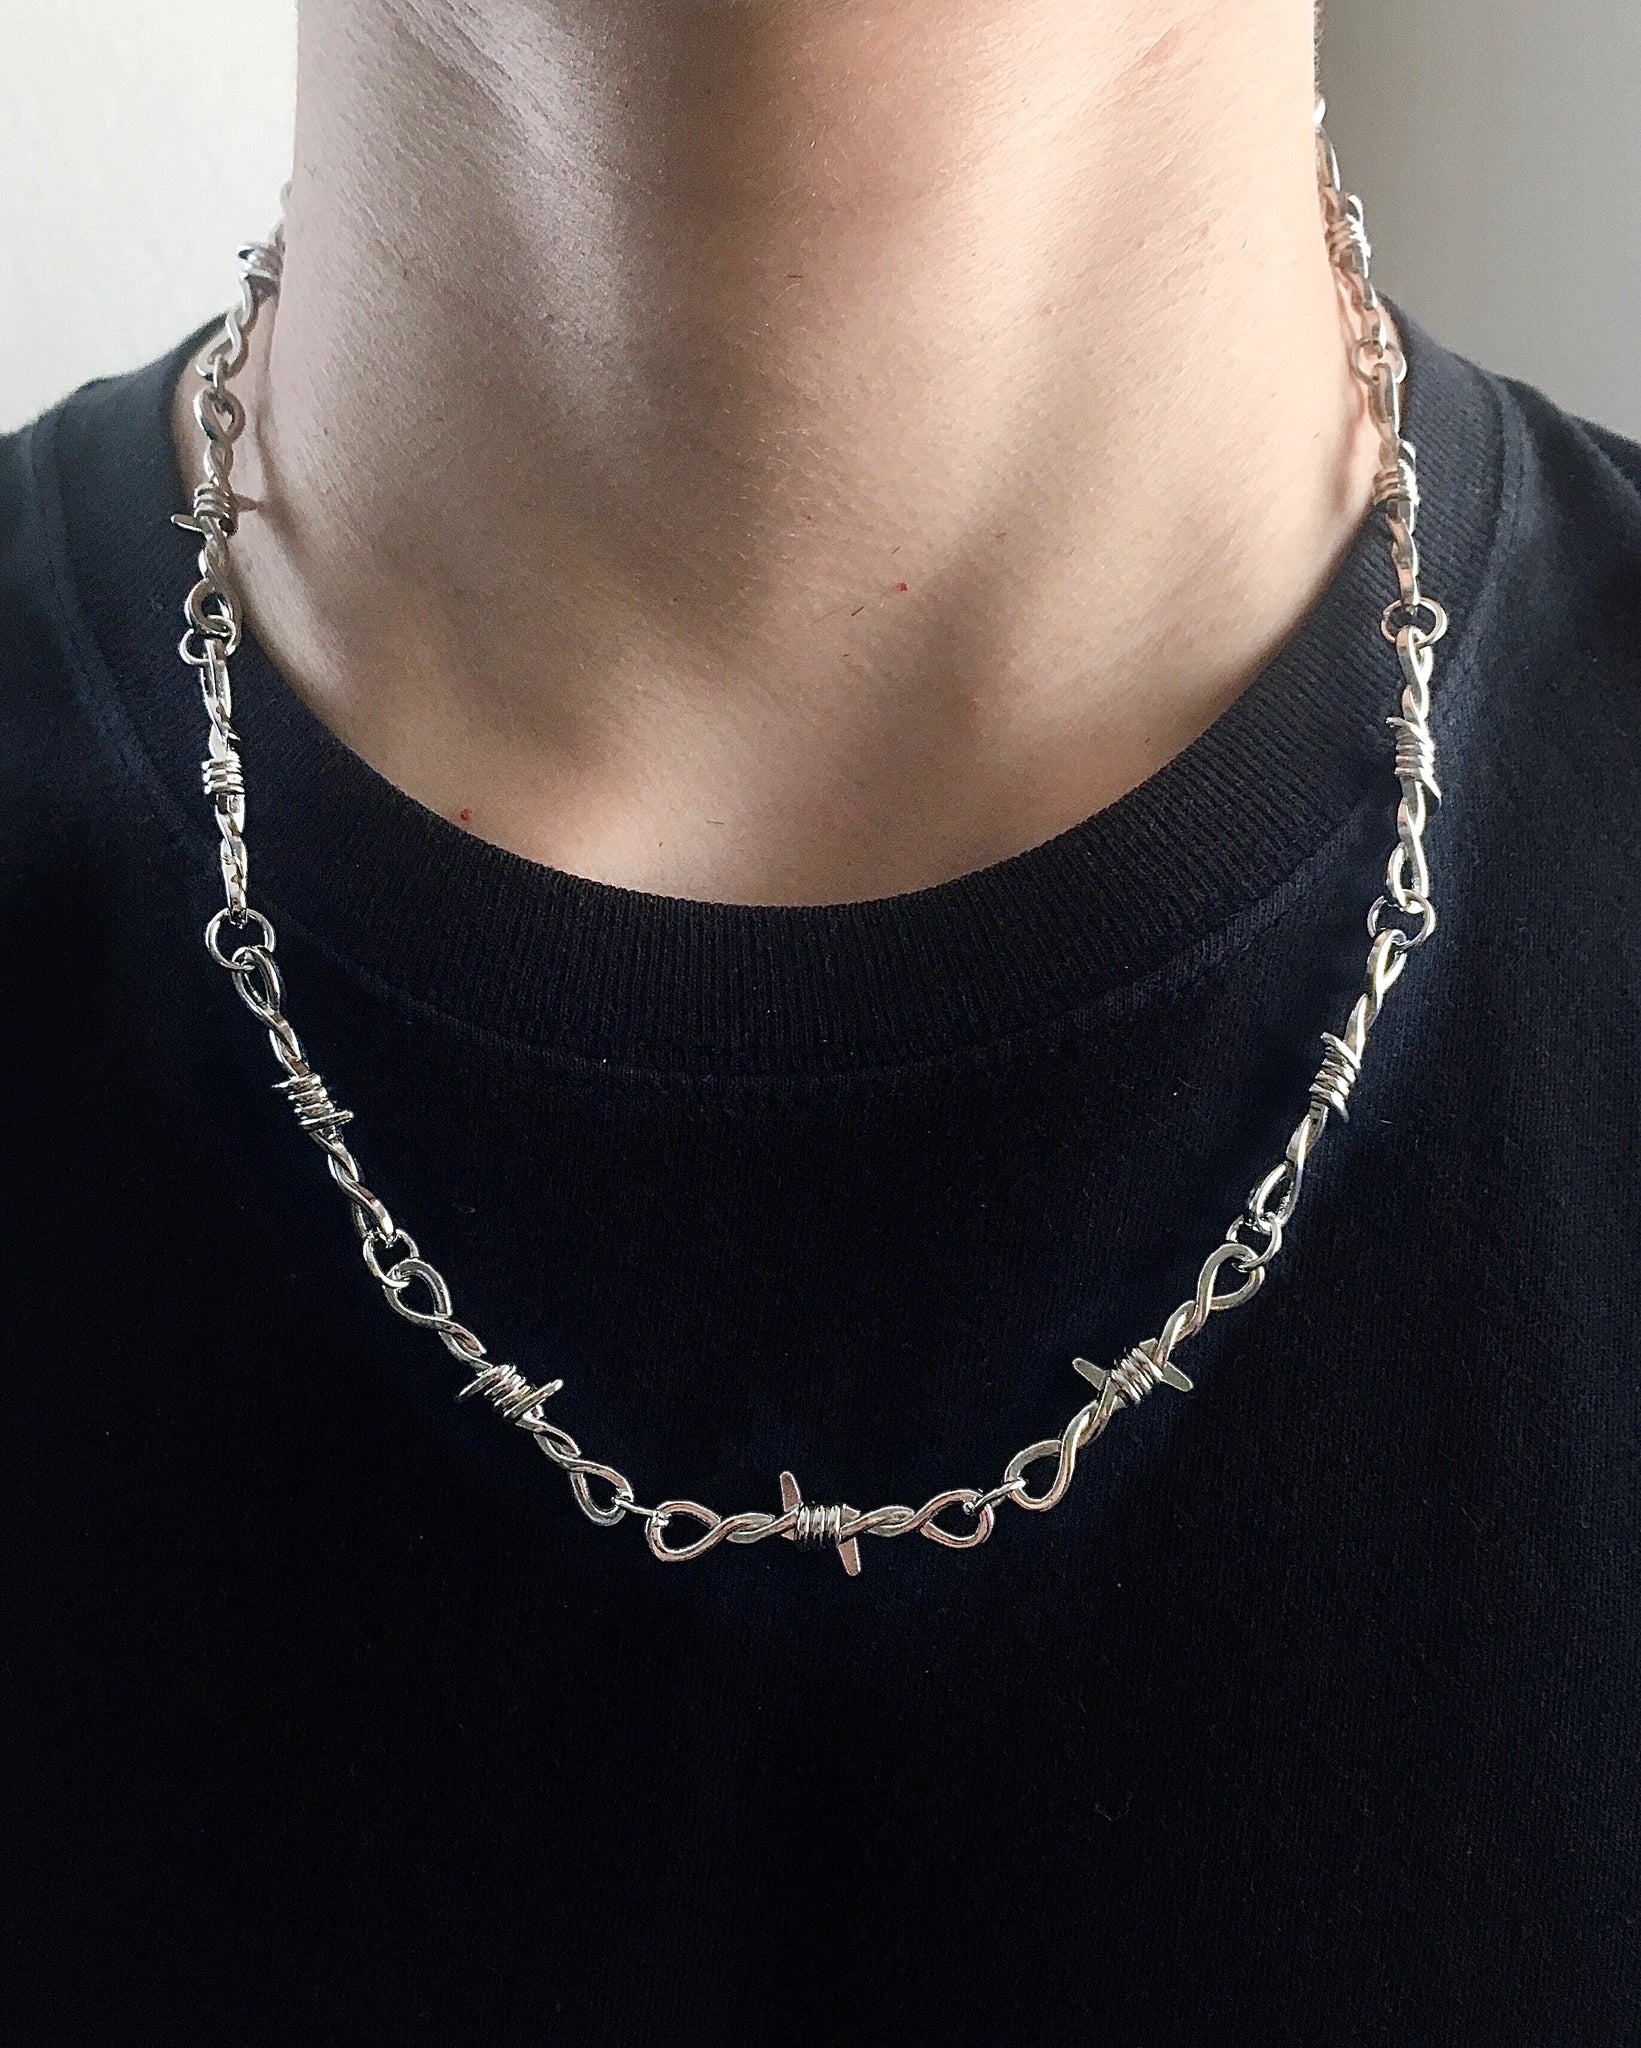 Barb Wire, Mens Silver Necklace Chain